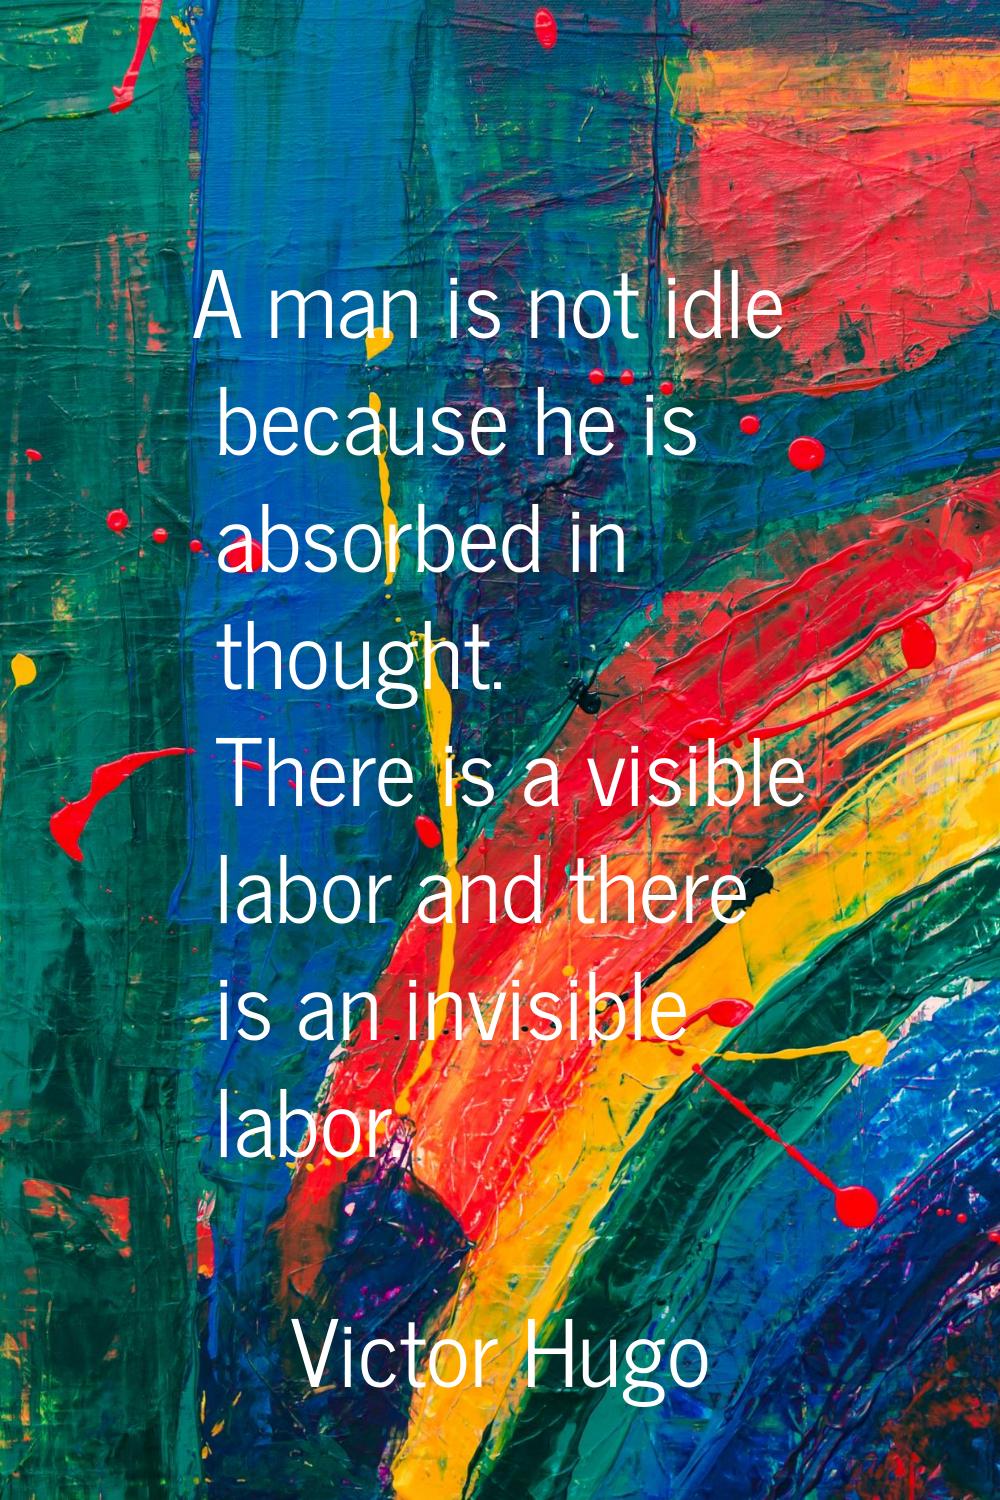 A man is not idle because he is absorbed in thought. There is a visible labor and there is an invis